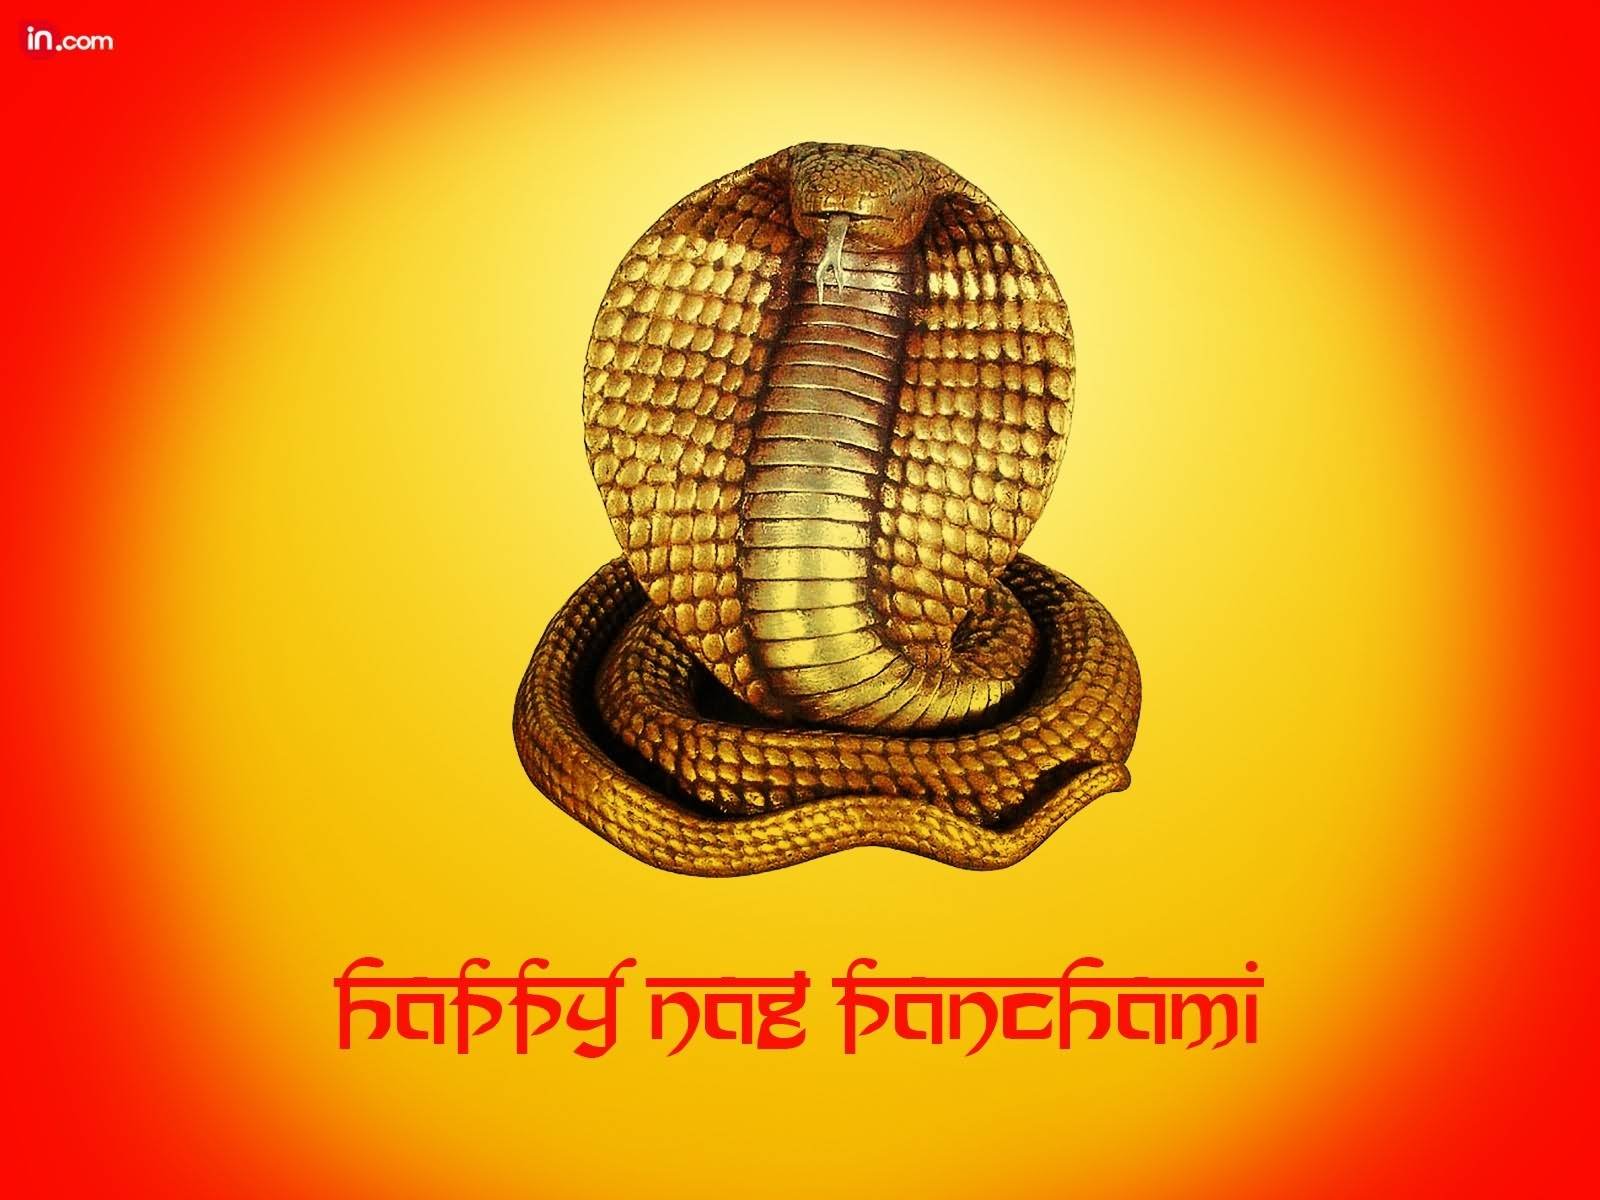 Happy Nag Panchami To You And Your Family